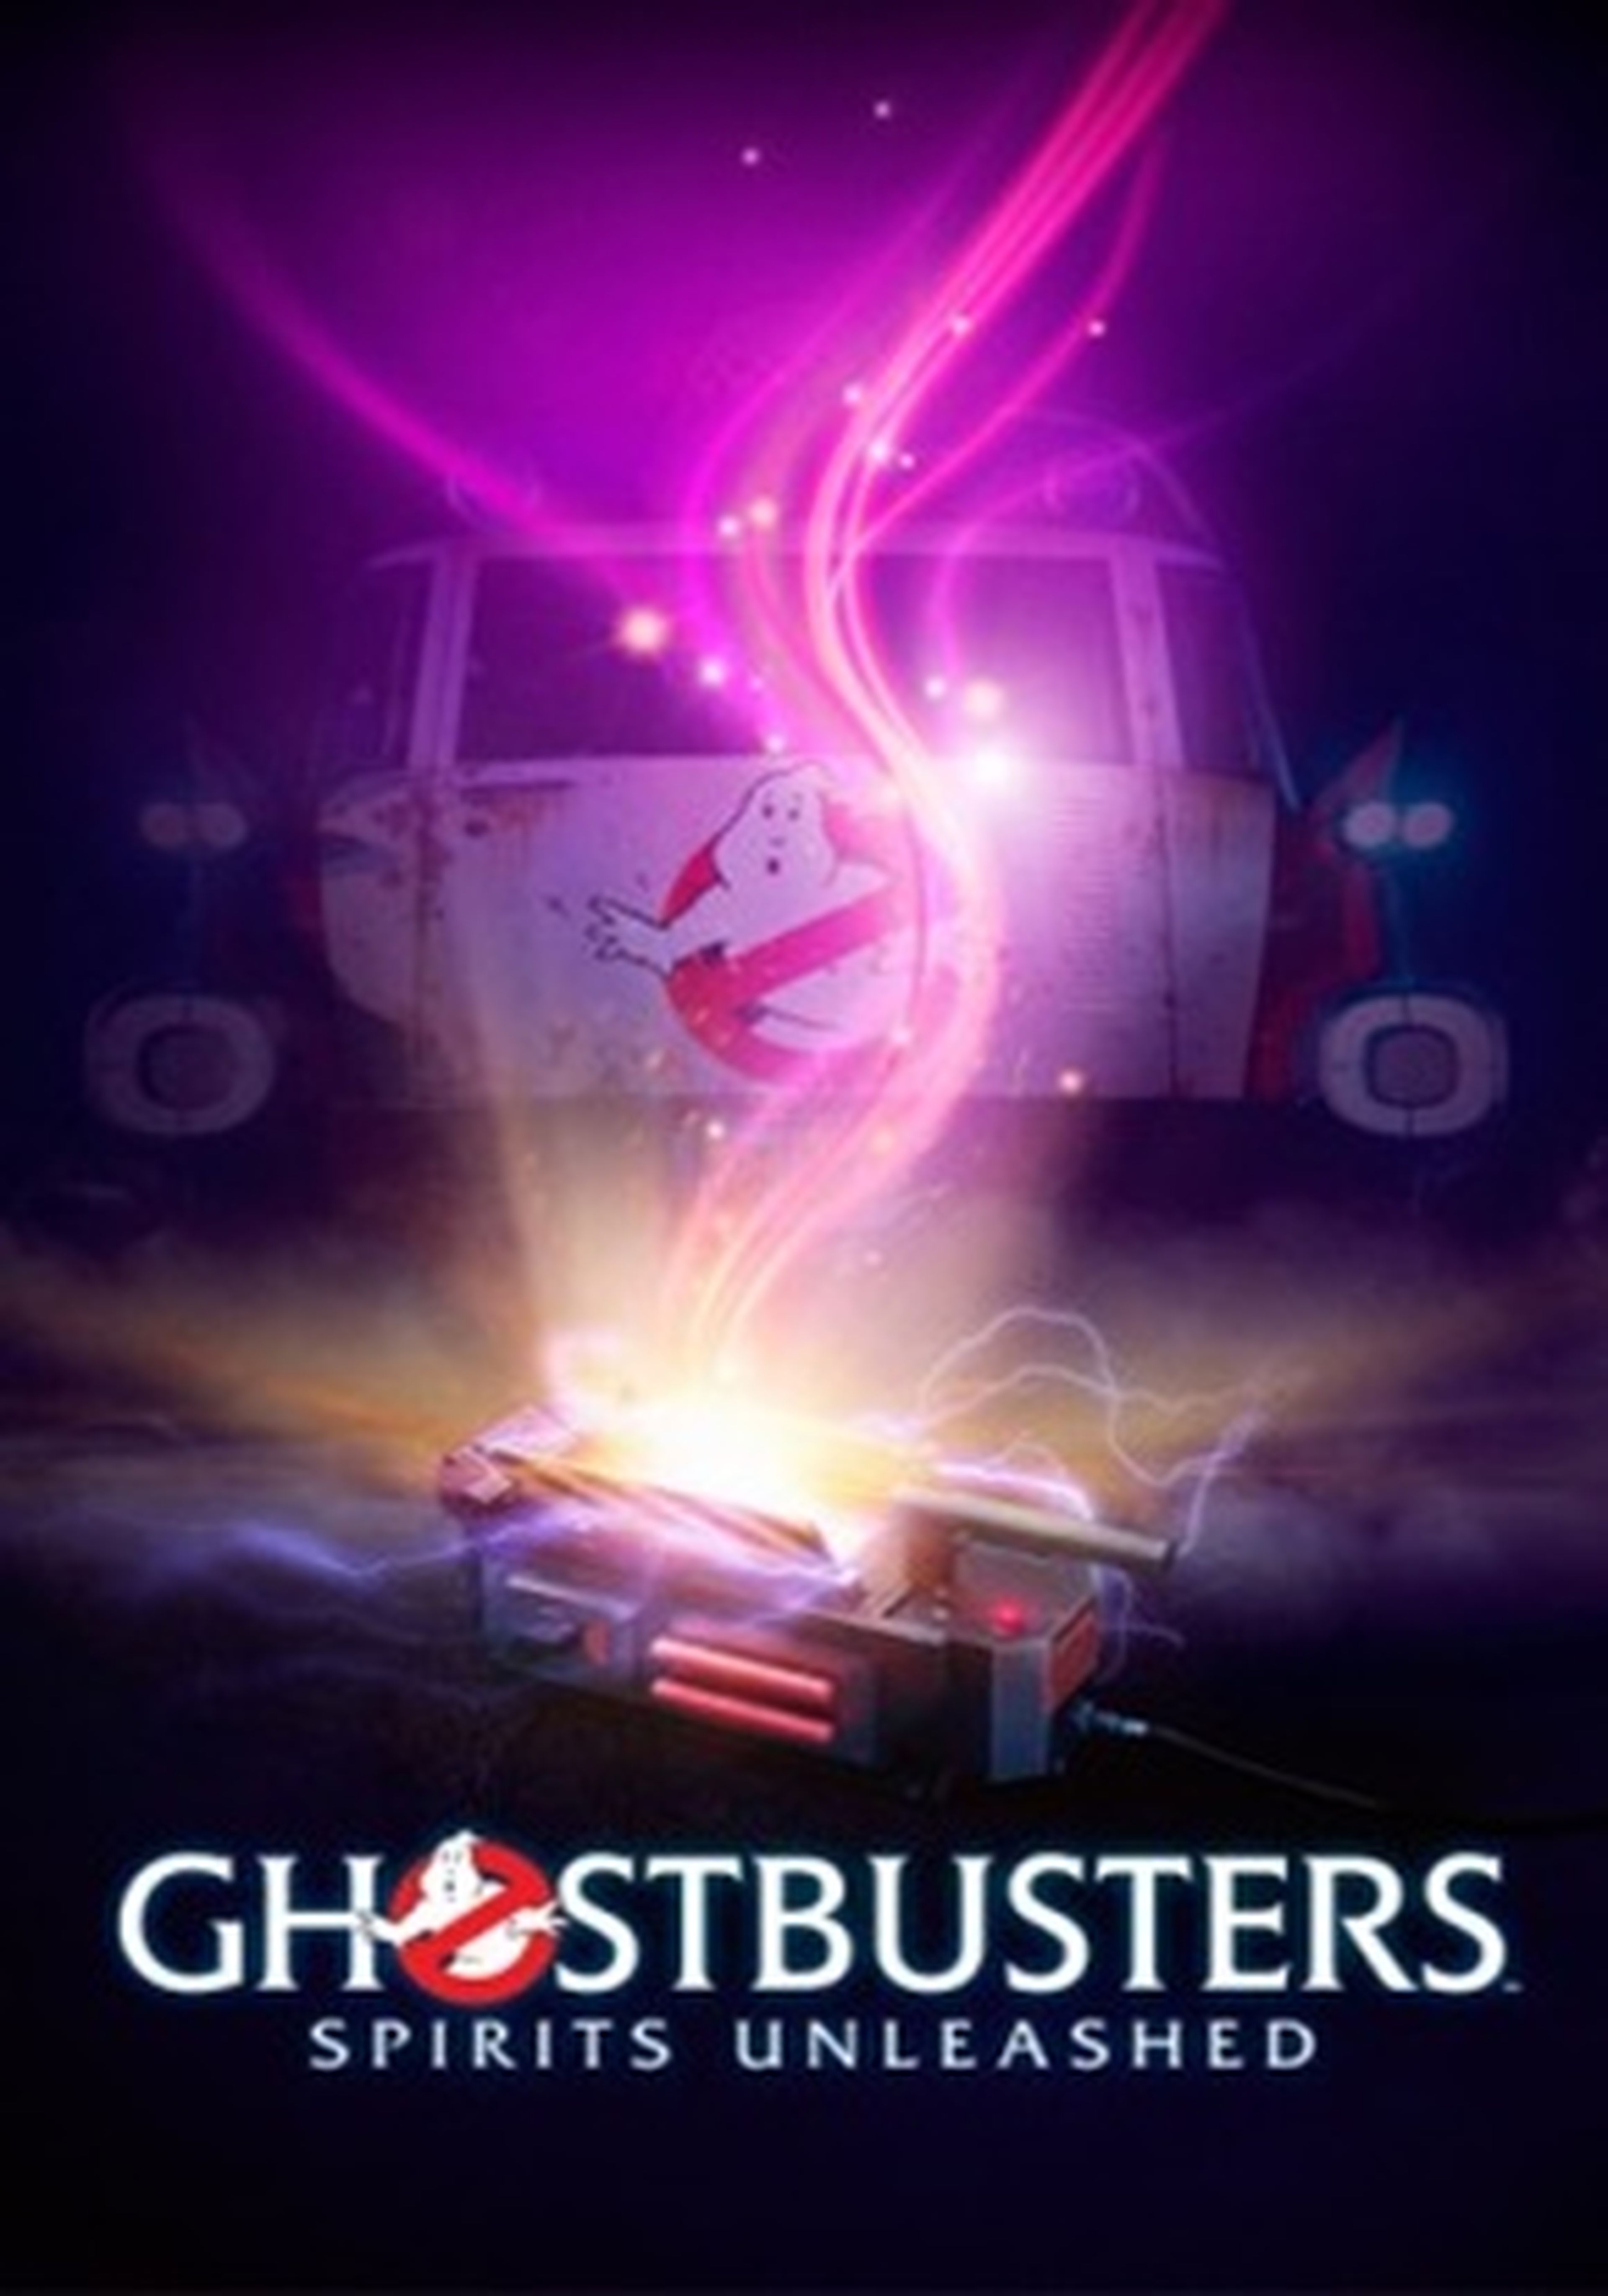 Ghostbusters Spirits Unleashed cartel